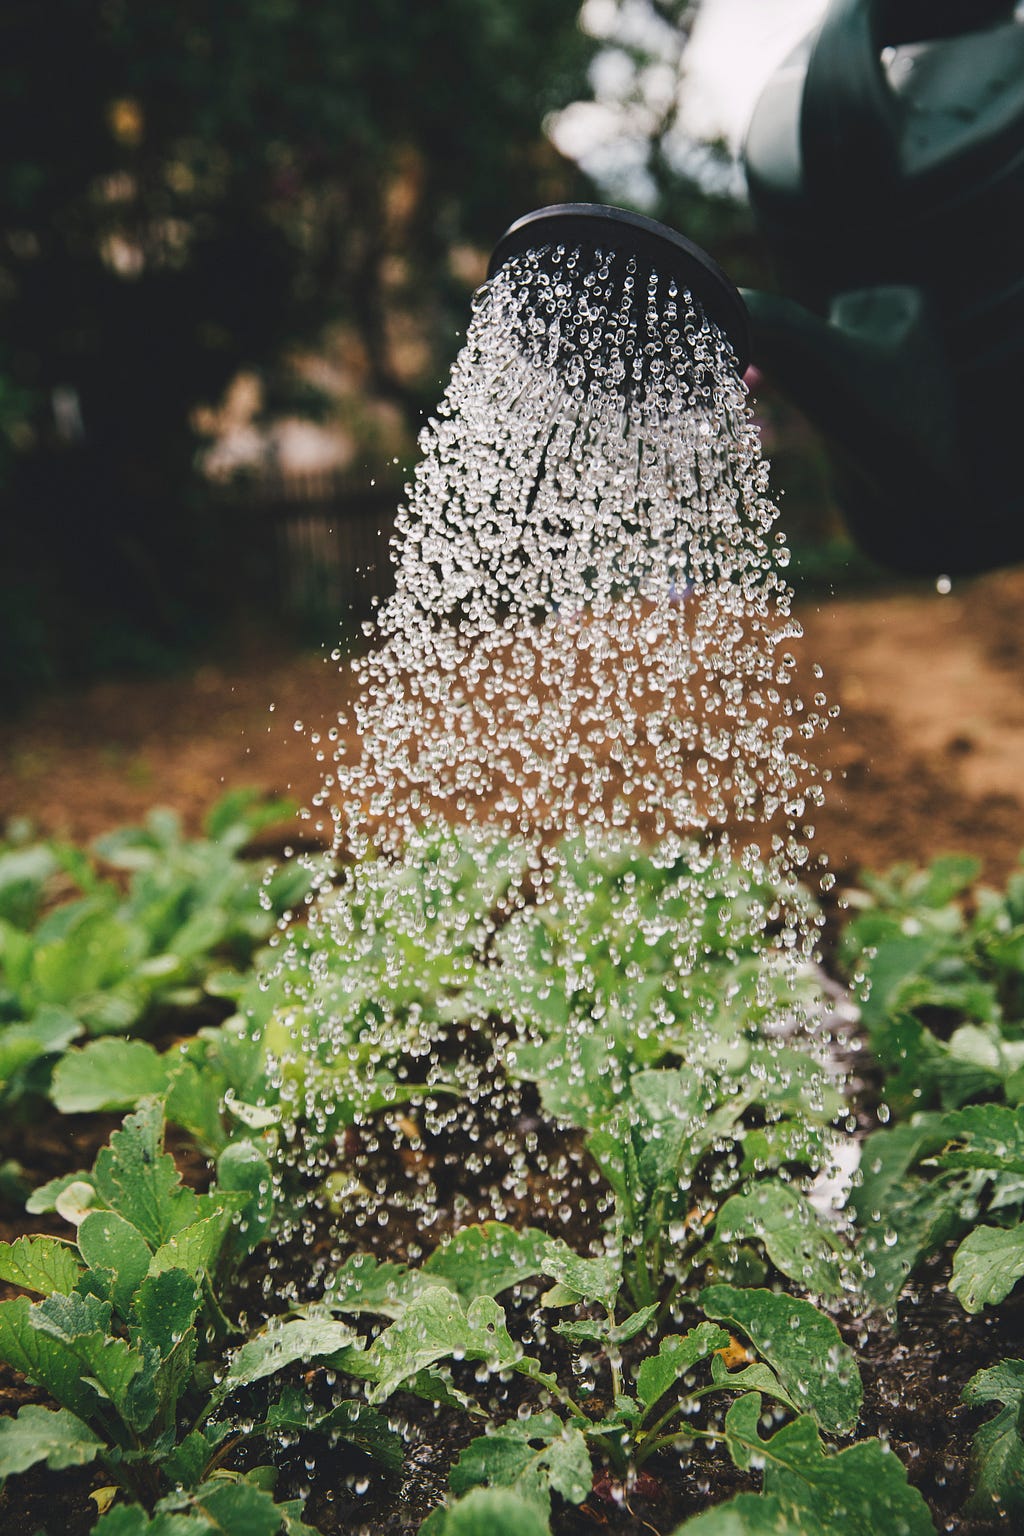 A picture of water pouring from a watering can onto plants; used to signify the art of giving to nourish others or self